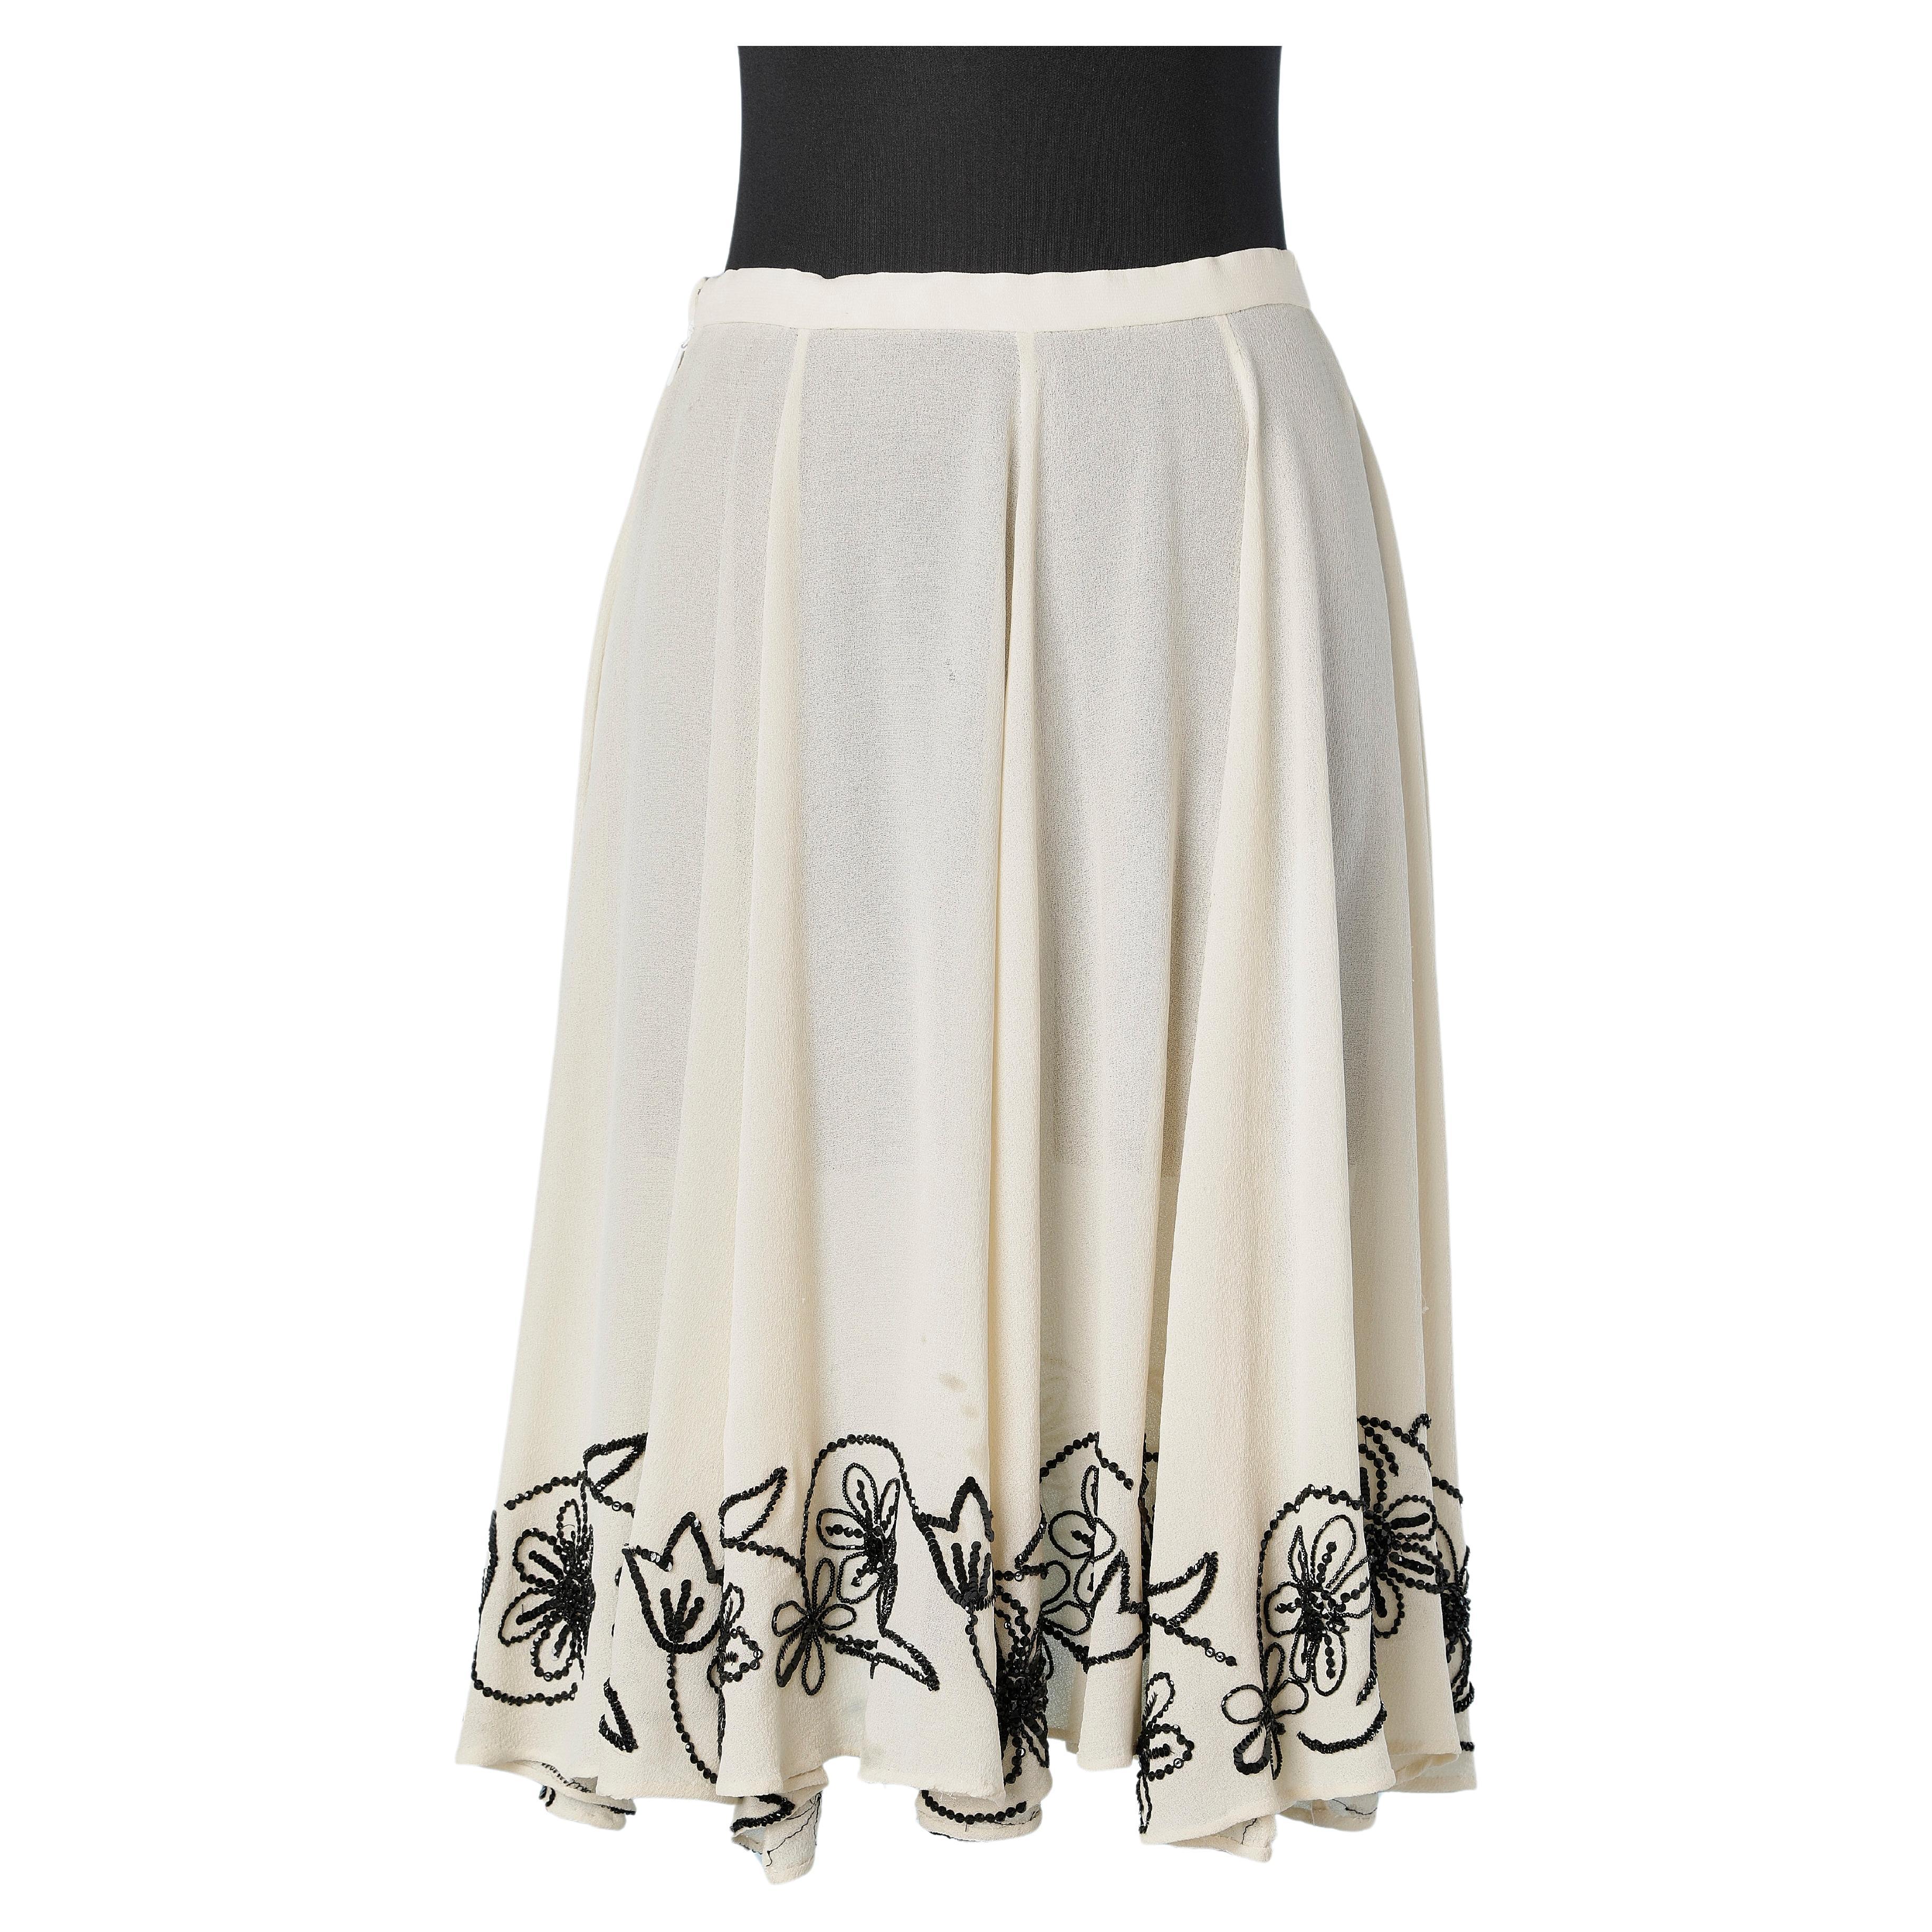 Off-white ilk chiffon skirt with black beads and sequins embroideries  Rochas  For Sale